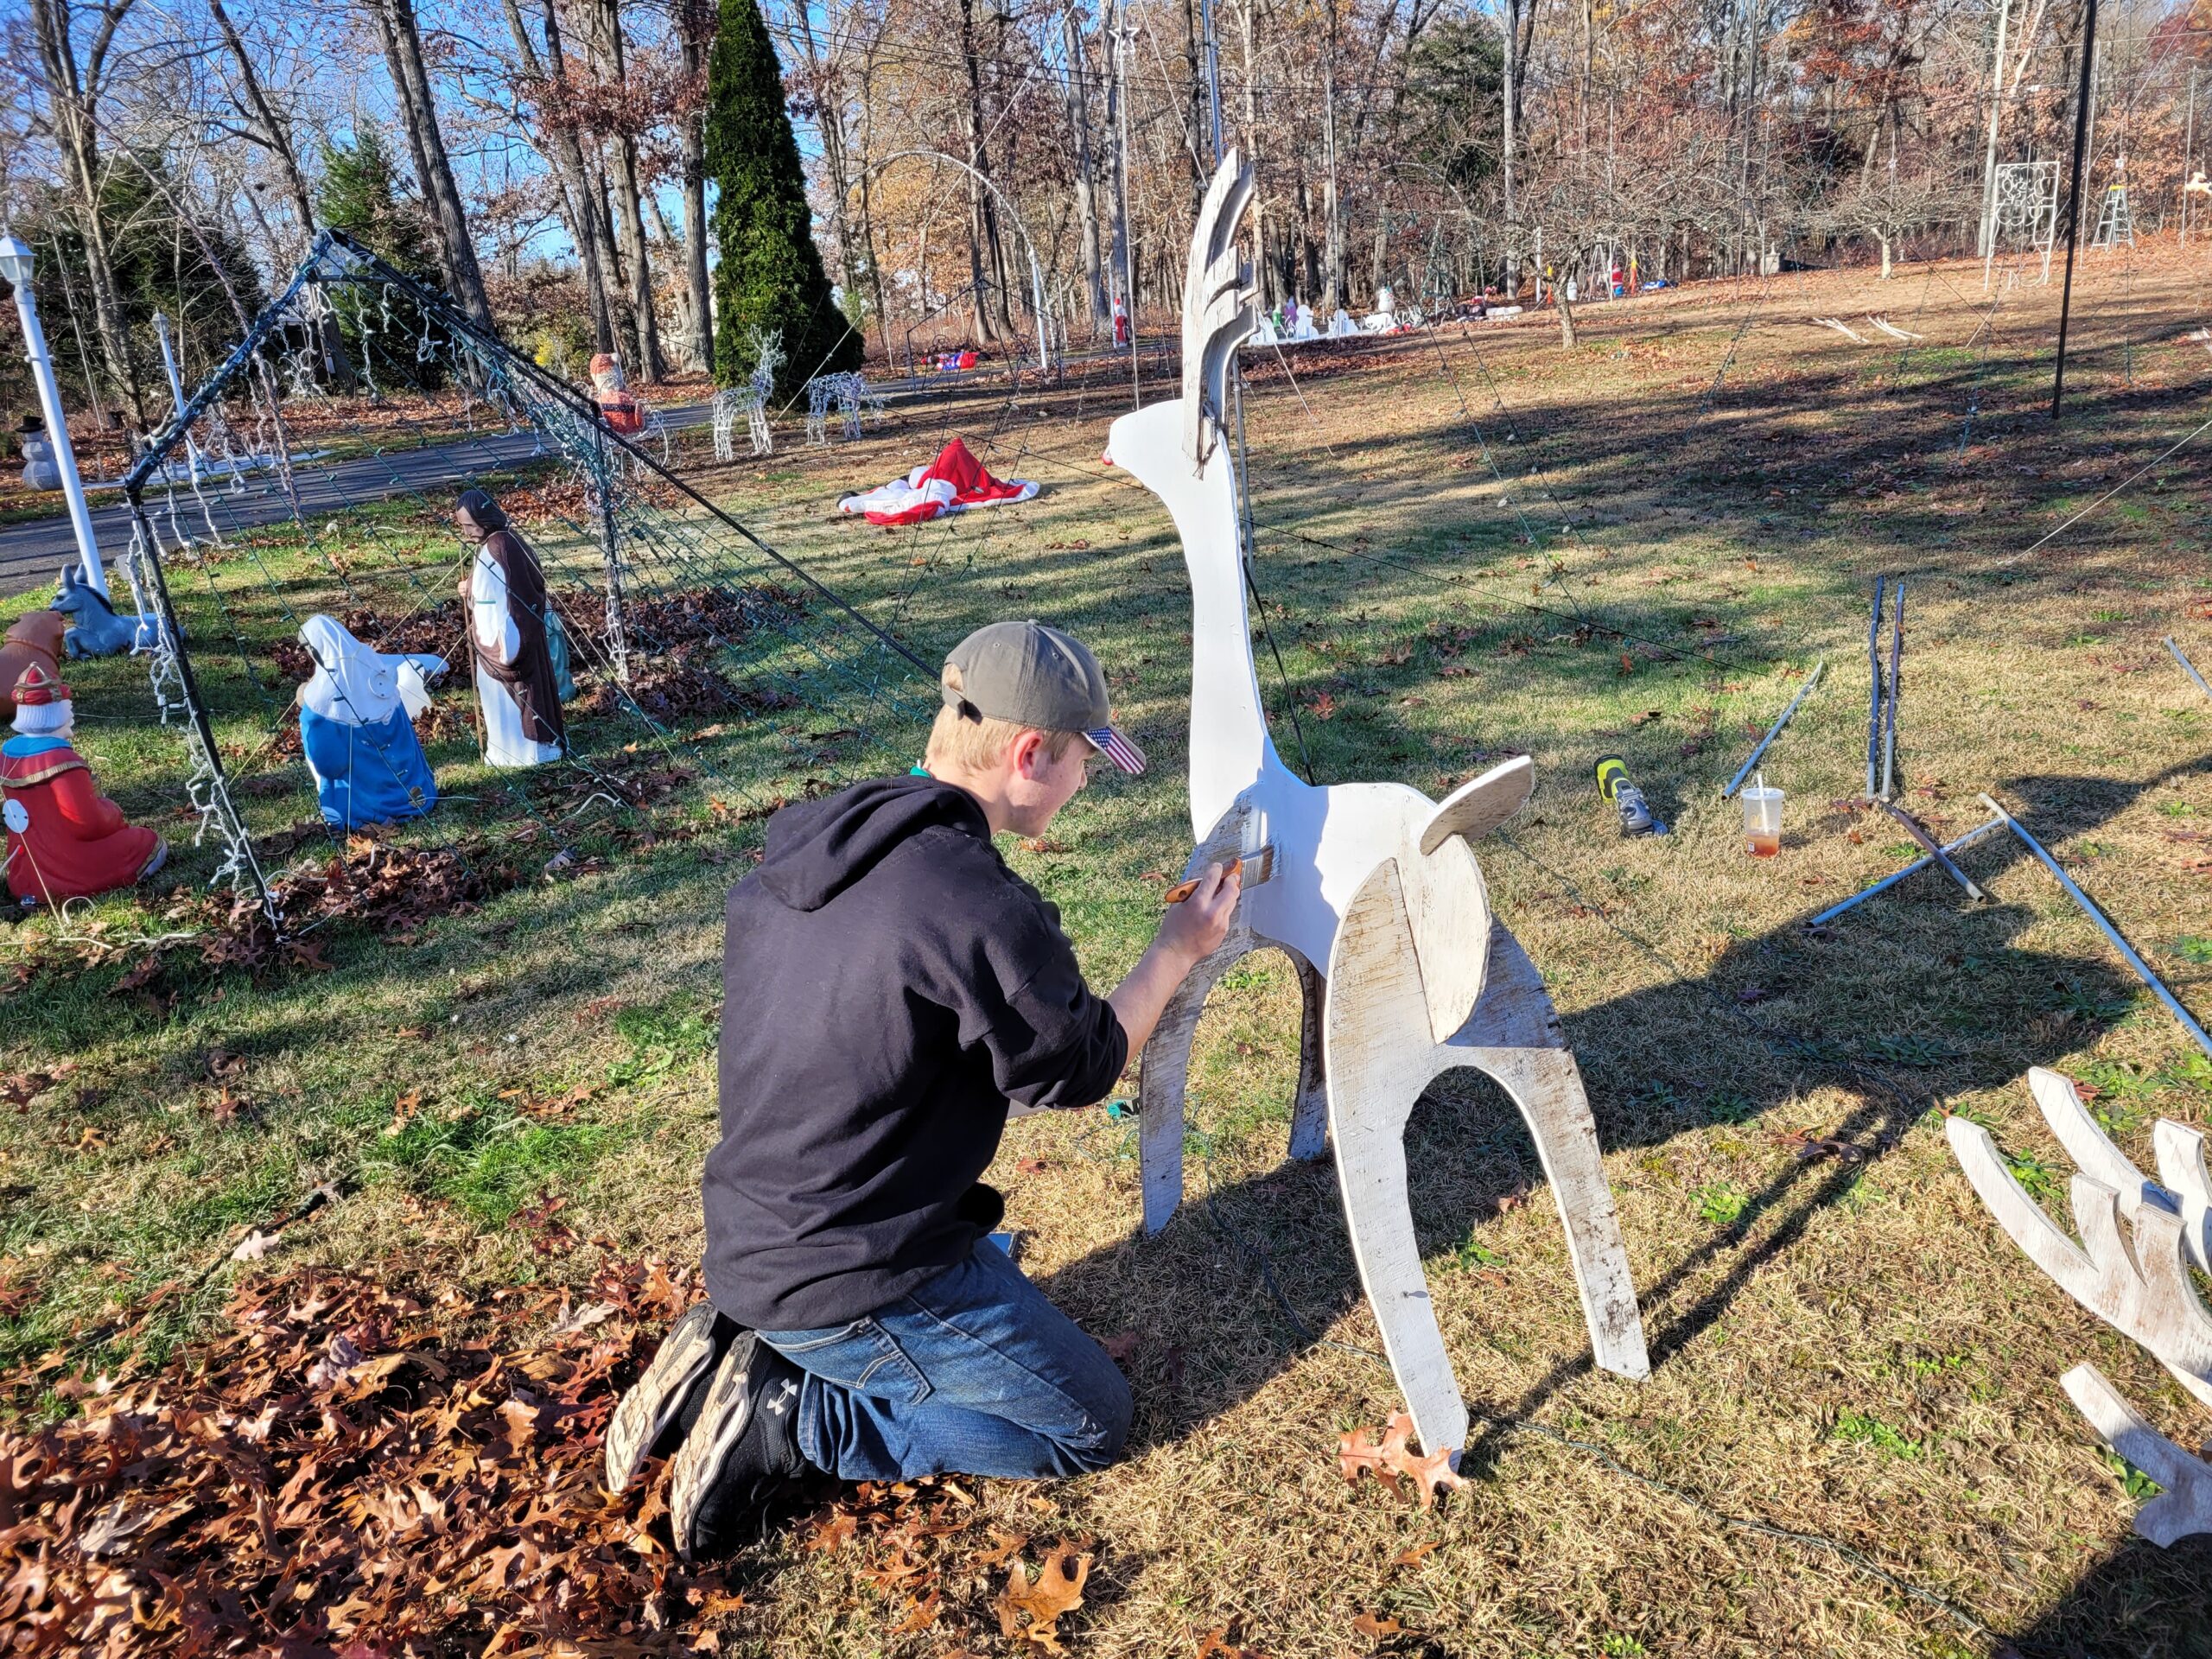 Hard at work getting the Lawlor Family Lights Christmas Lights display in Pittsgrove New Jersey ready